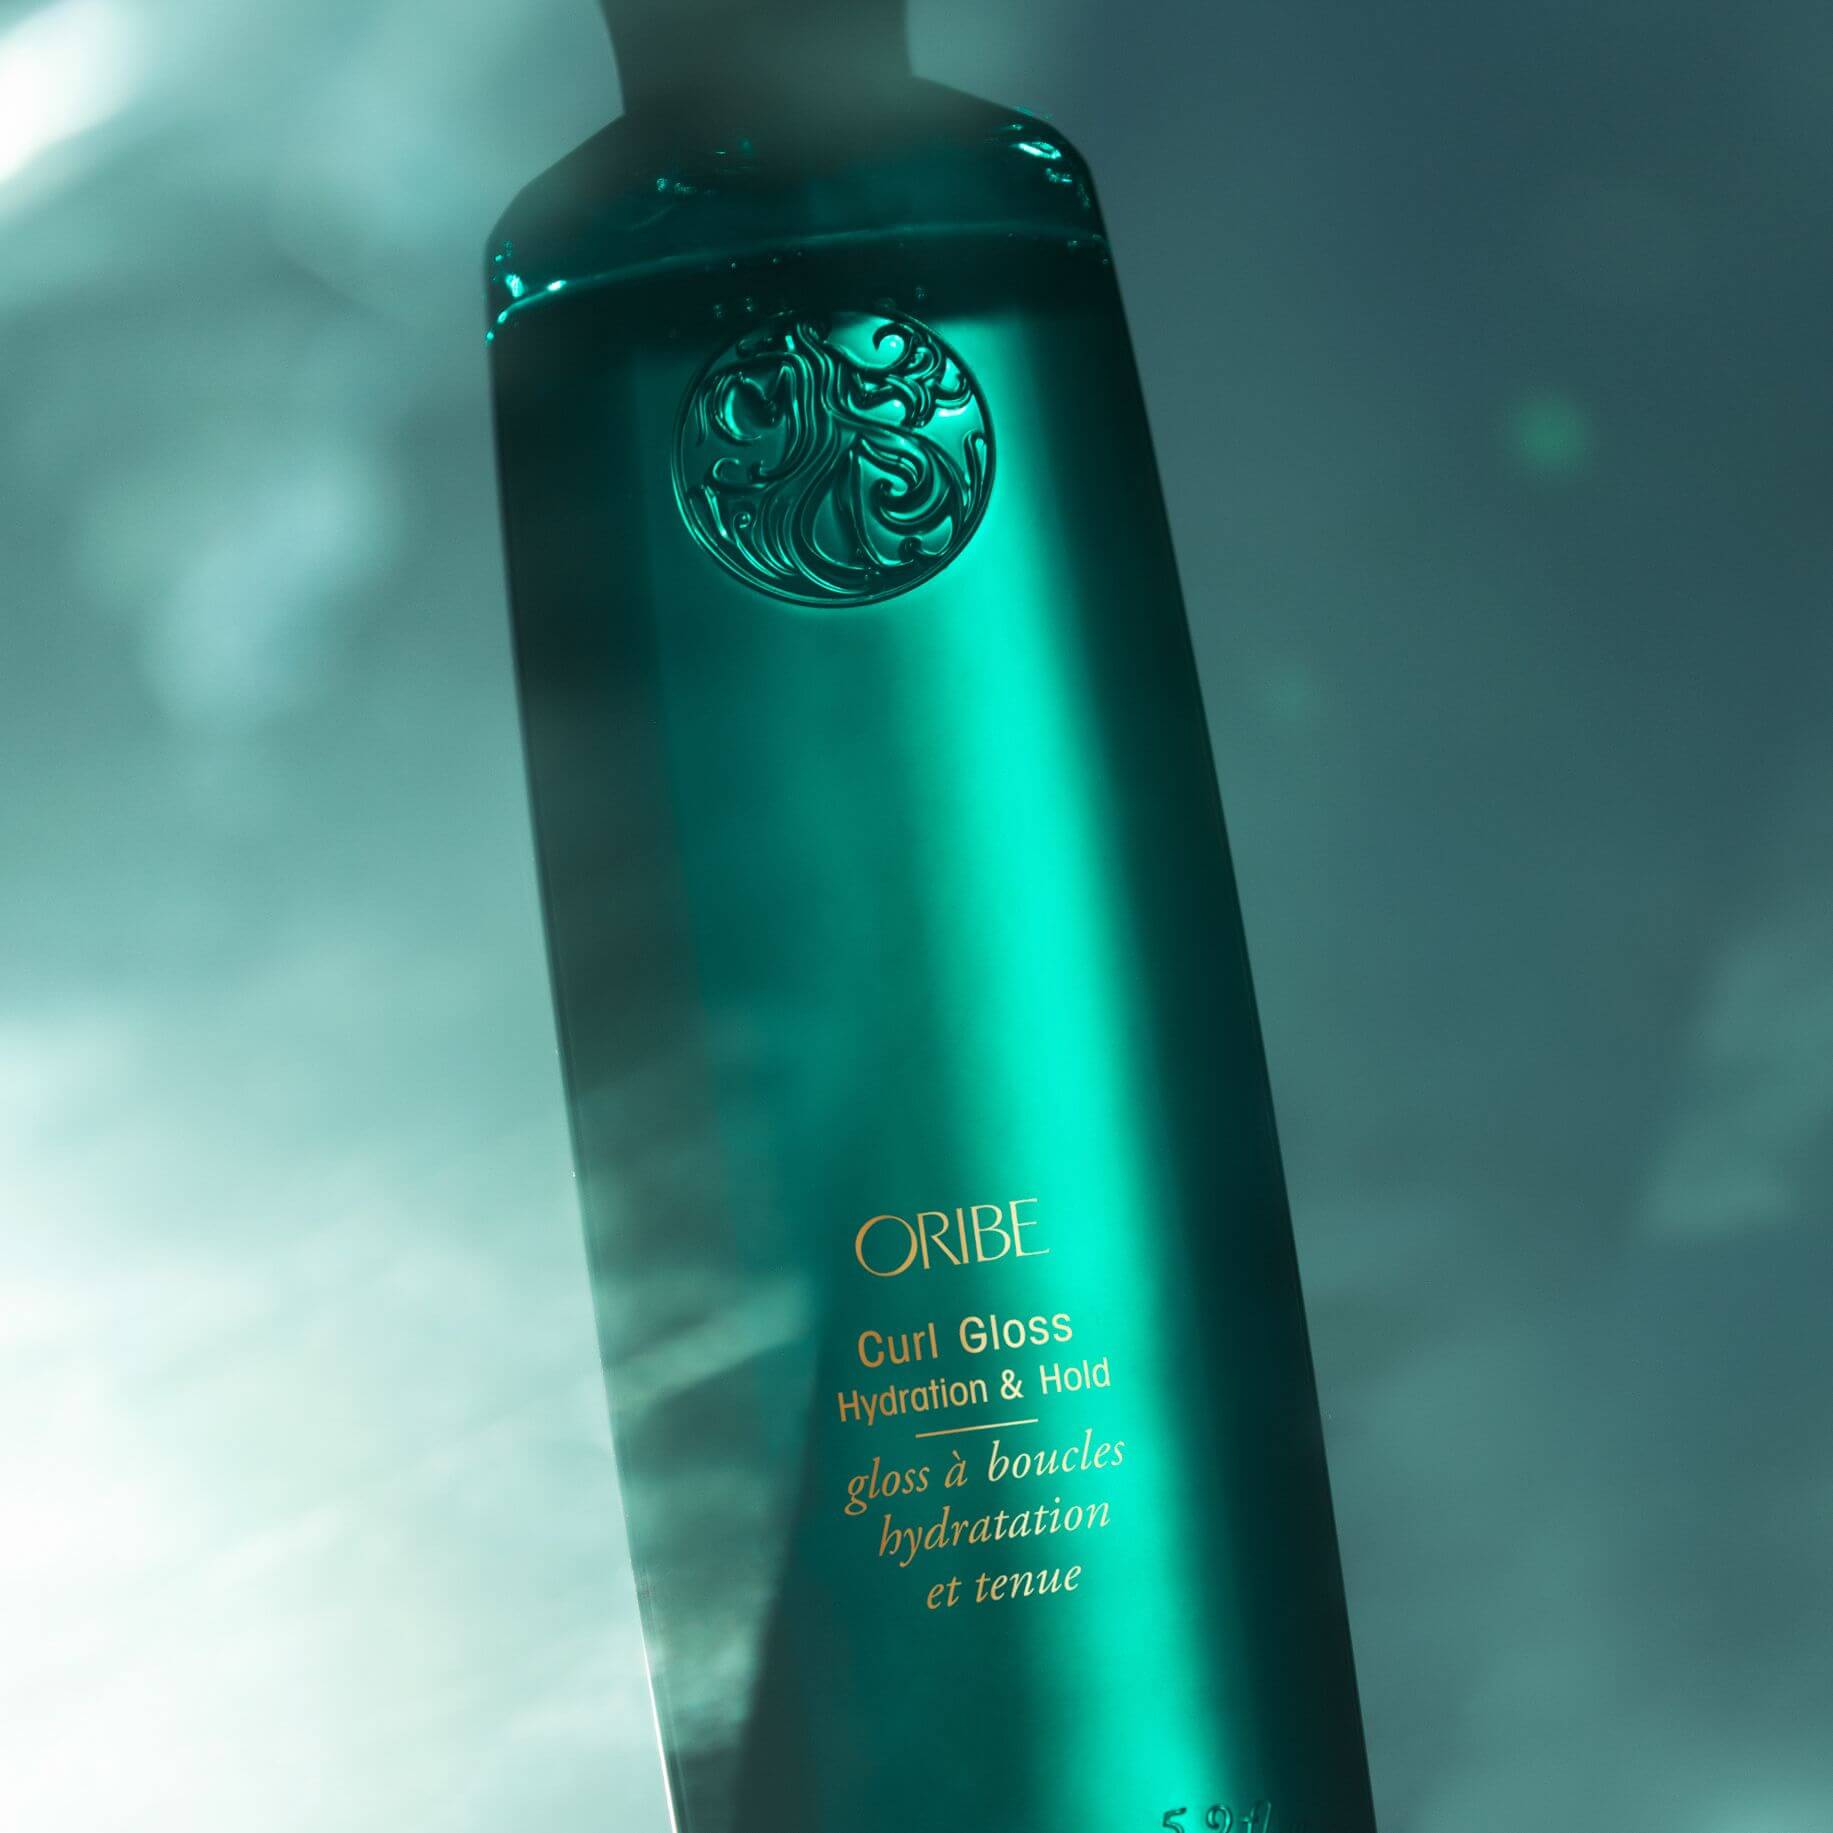 Oribe Review #5: Oribe Curl Gloss Hydration & Hold